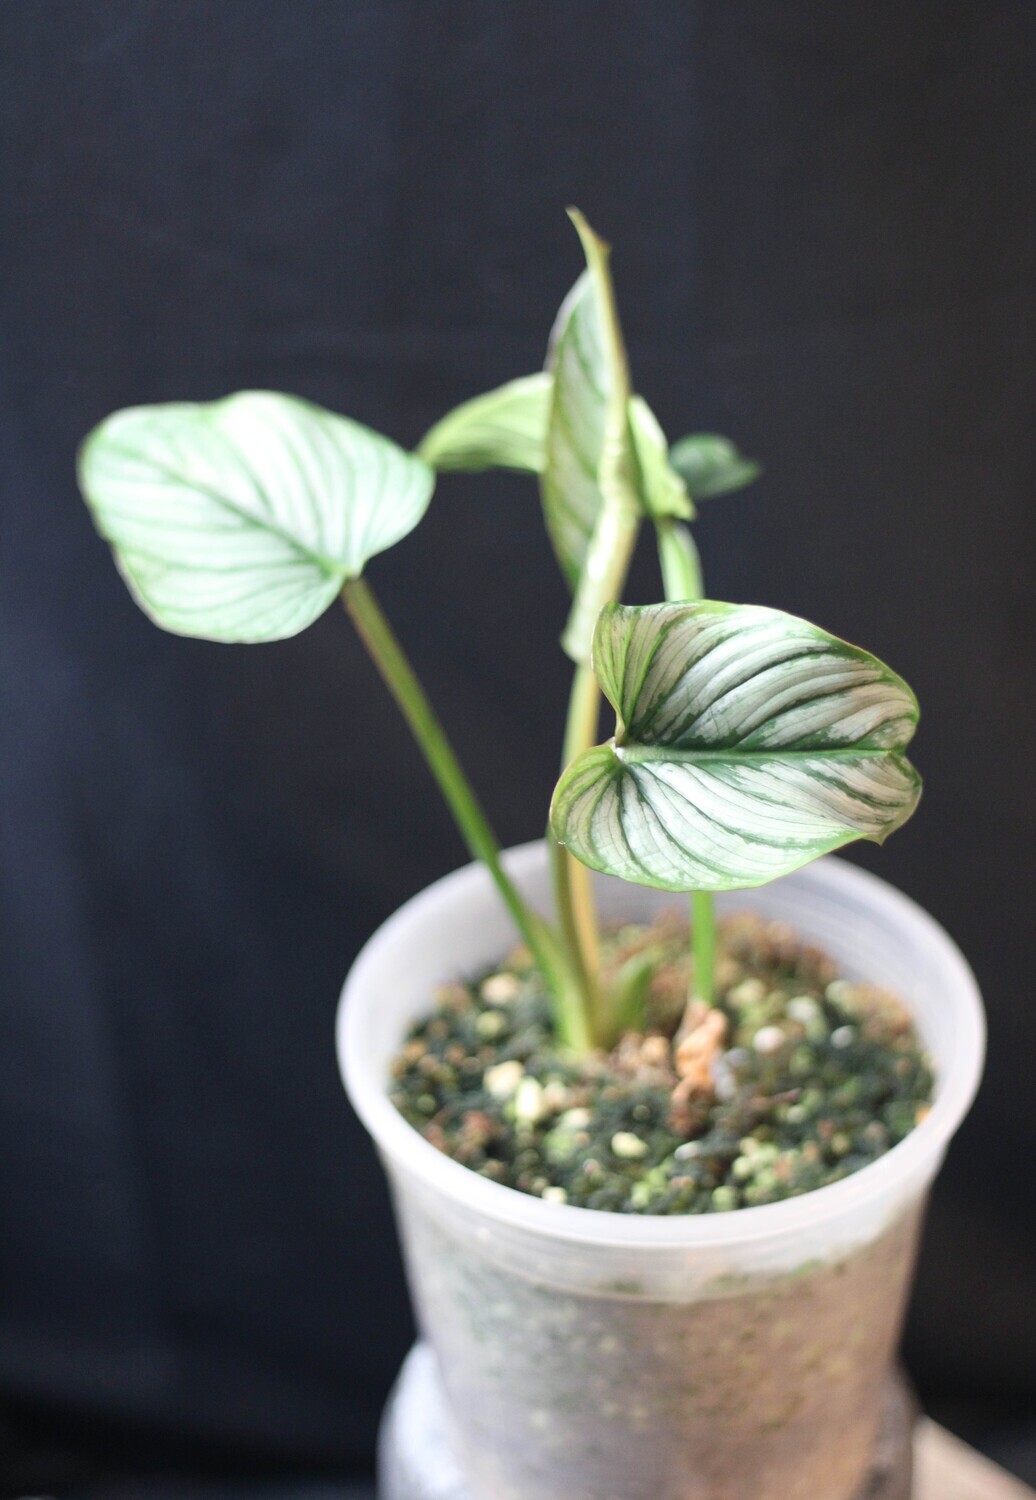 Philodendron Mamei “Silver” - A